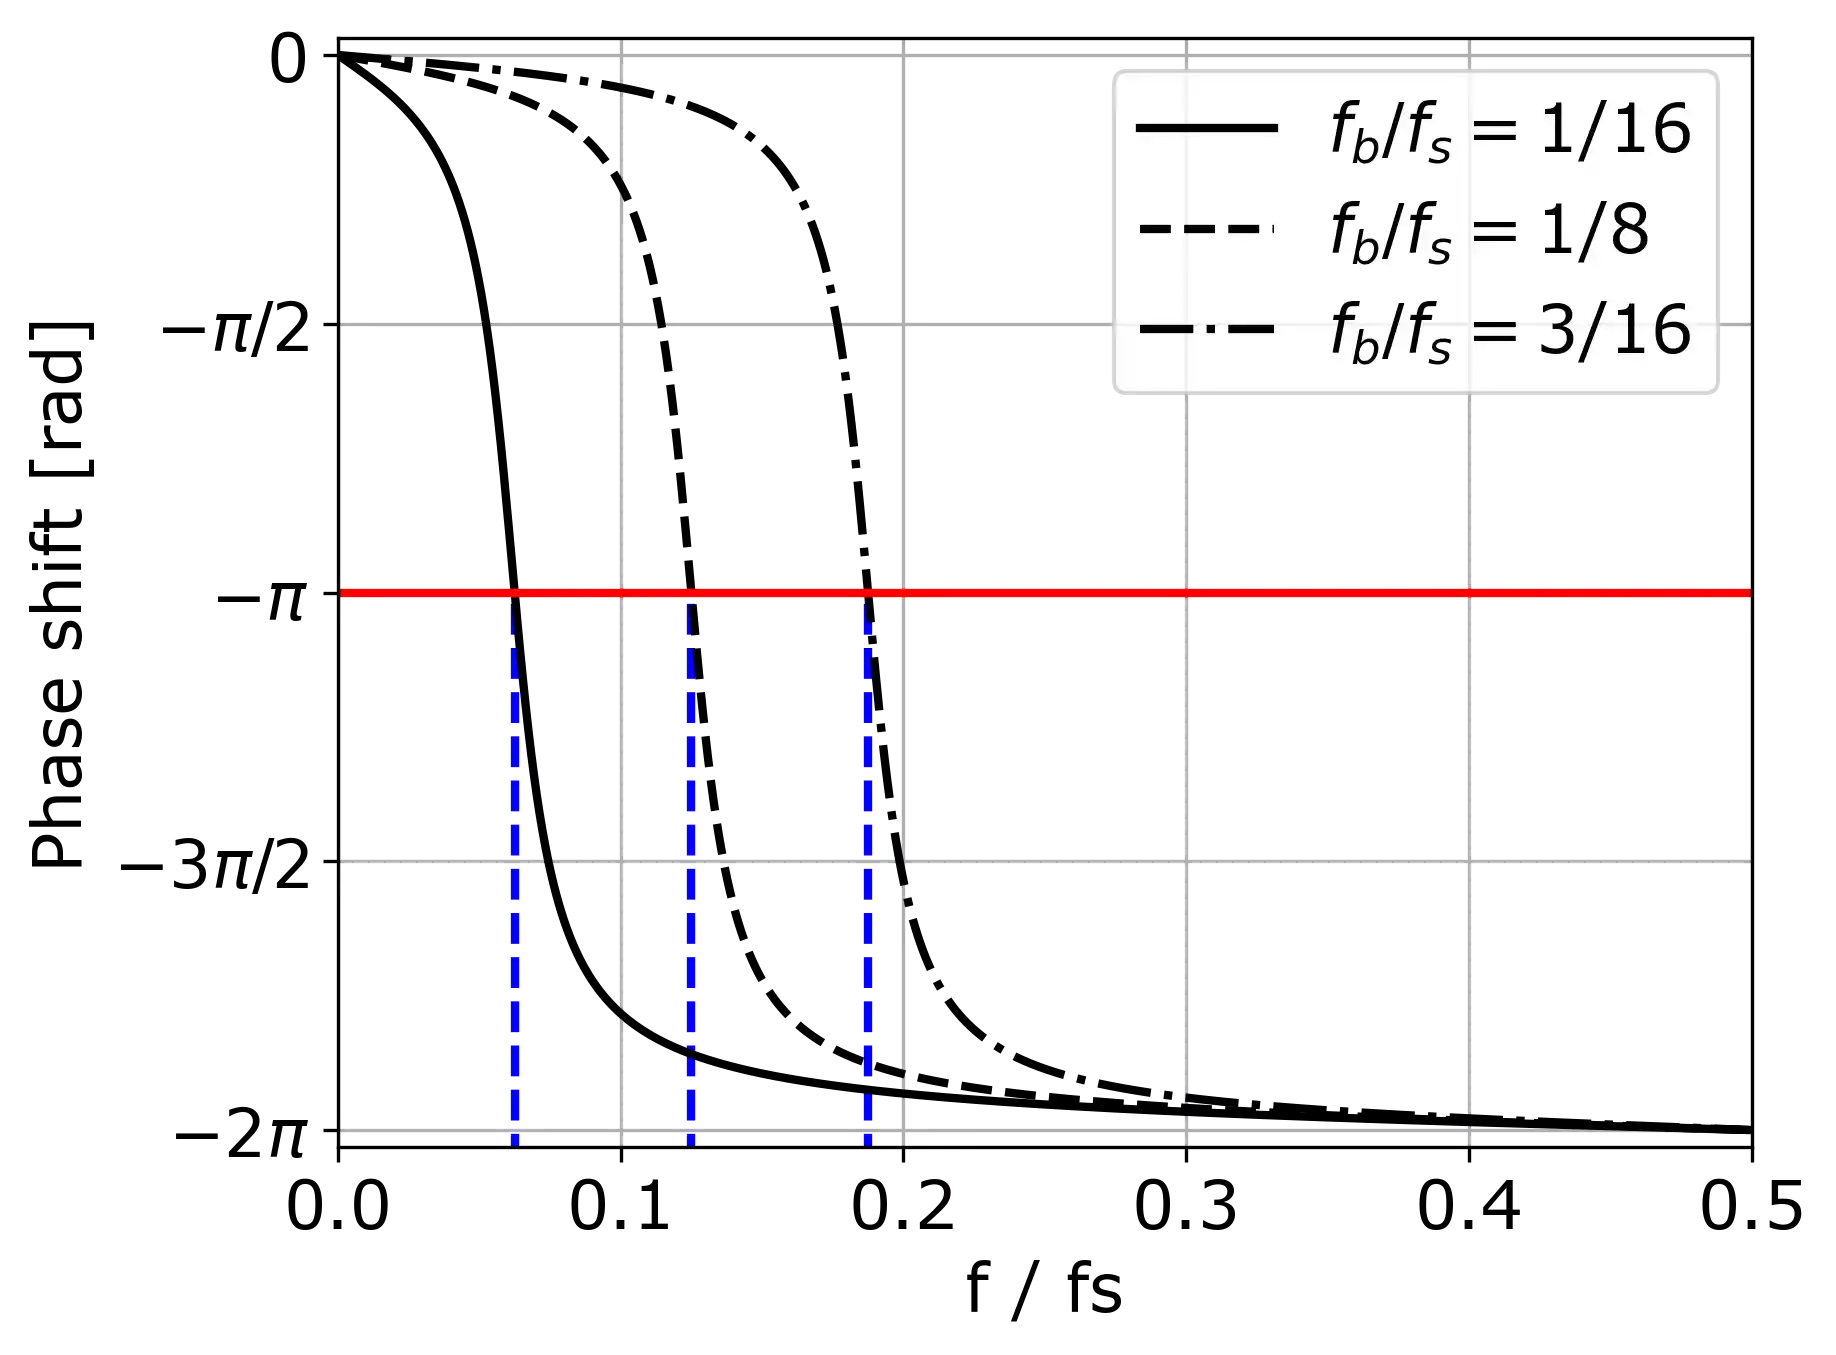 Phase response of the second-order allpass filter with constant bandwidth.